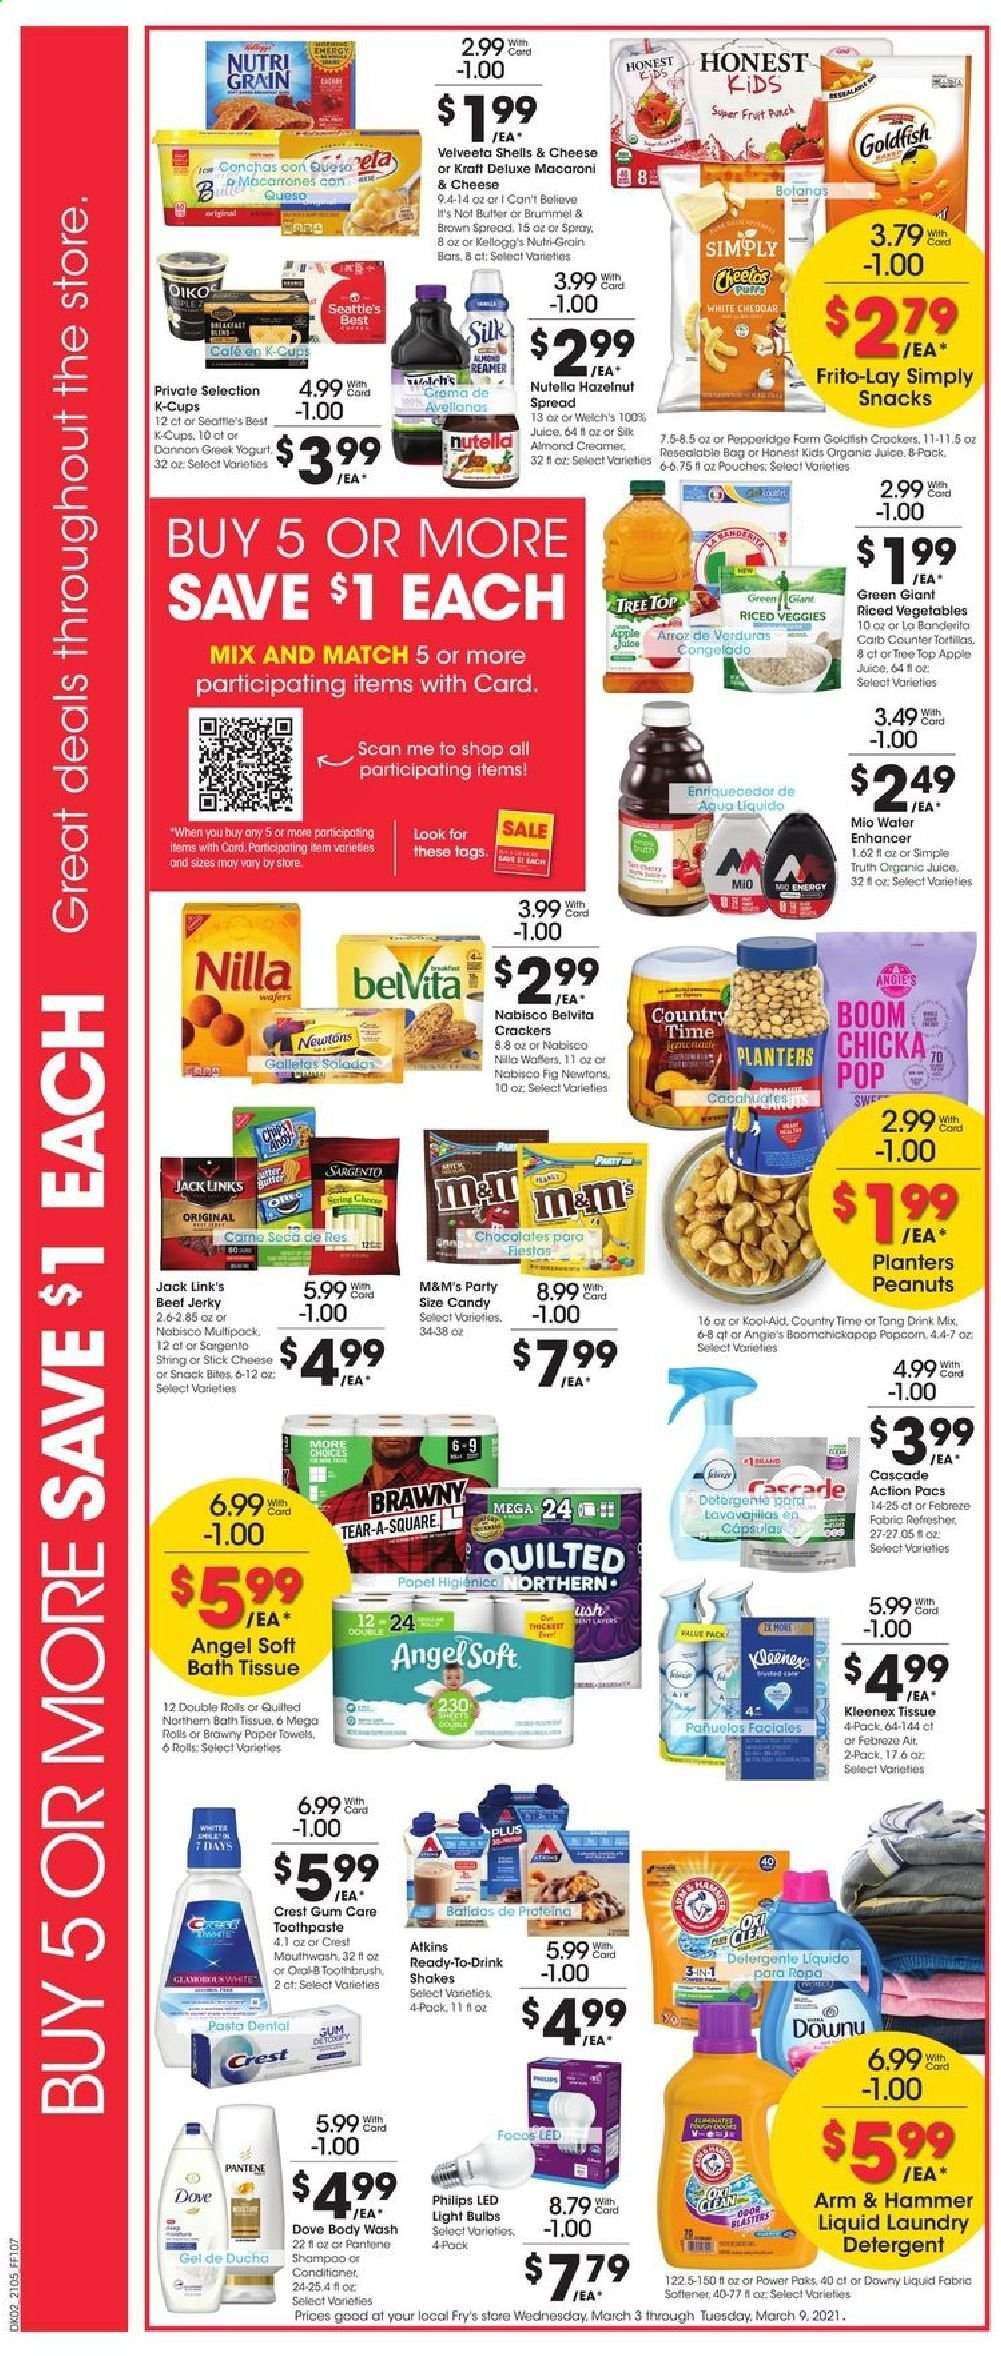 thumbnail - Fry’s Flyer - 03/03/2021 - 03/09/2021 - Sales products - Philips, Apple, tortillas, 7 Days, Welch's, Kraft®, beef jerky, jerky, Sargento, greek yoghurt, yoghurt, Oikos, Dannon, Silk, shake, butter, creamer, almond creamer, Nutella, chocolate, M&M's, crackers, Kellogg's, snack, popcorn, Goldfish, Frito-Lay, cheese sticks, Jack Link's, ARM & HAMMER, belVita, Nutri-Grain, macaroni, almonds, peanuts, Planters, apple juice, juice, Country Time, coffee capsules, K-Cups, punch, Dove, bath tissue, Kleenex, Quilted Northern, detergent, Febreze, Cascade, fabric softener, laundry detergent, body wash, shampoo, toothbrush, toothpaste, mouthwash, Crest, conditioner, Pantene, bulb, light bulb, towel, LED light. Page 3.